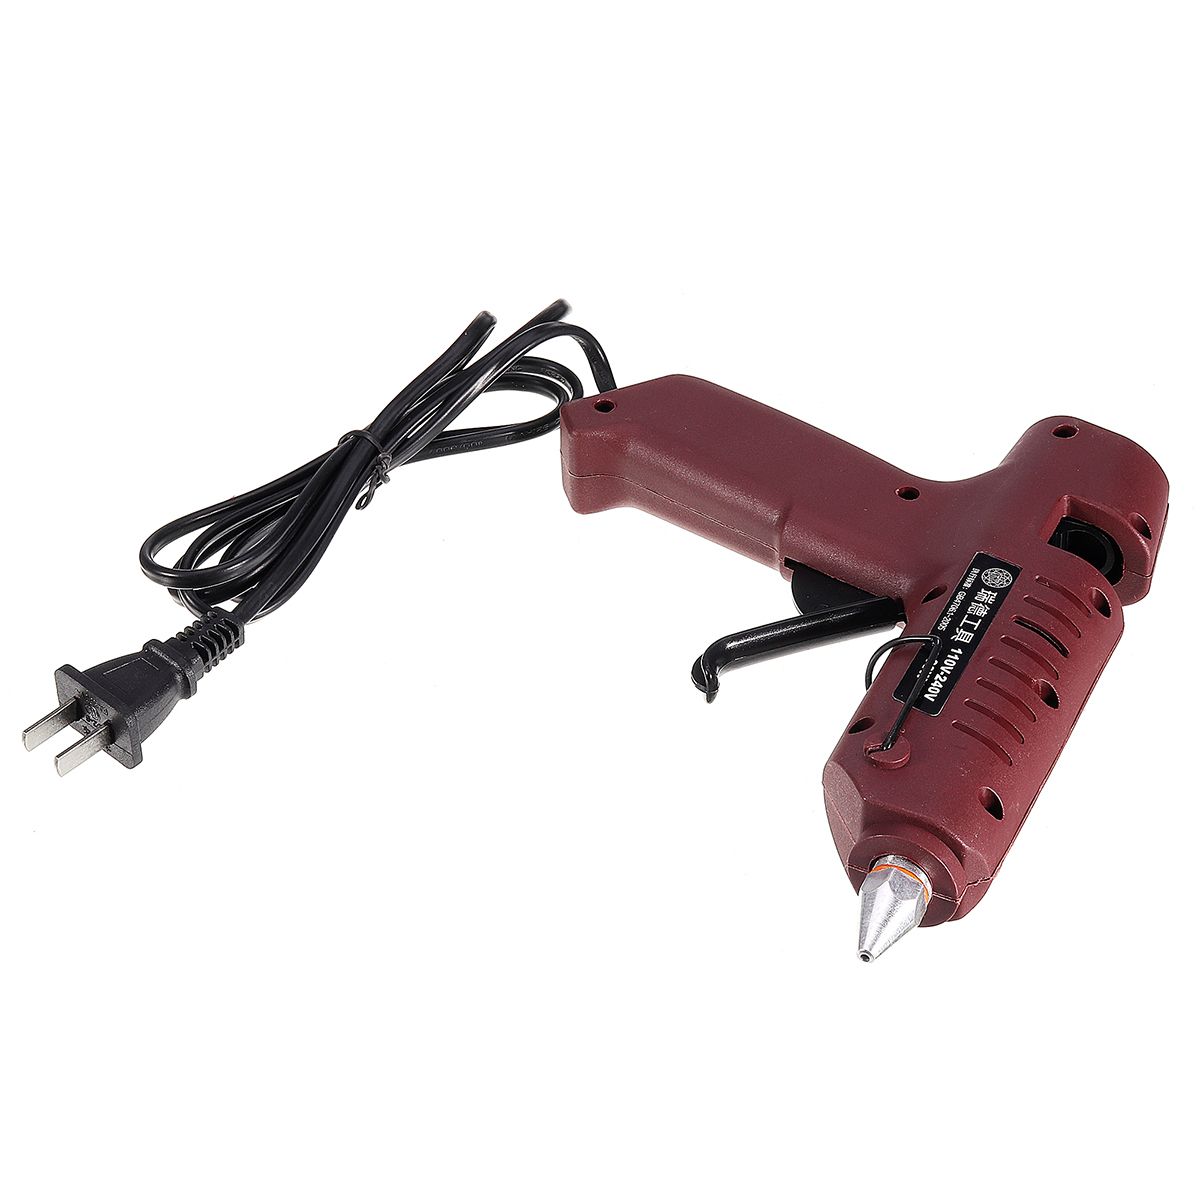 CREST-Professional-Red-12V-Ugraded-Lithium-Electric-Power-Drill-Set-with-Plastic-Toolbox-1713221